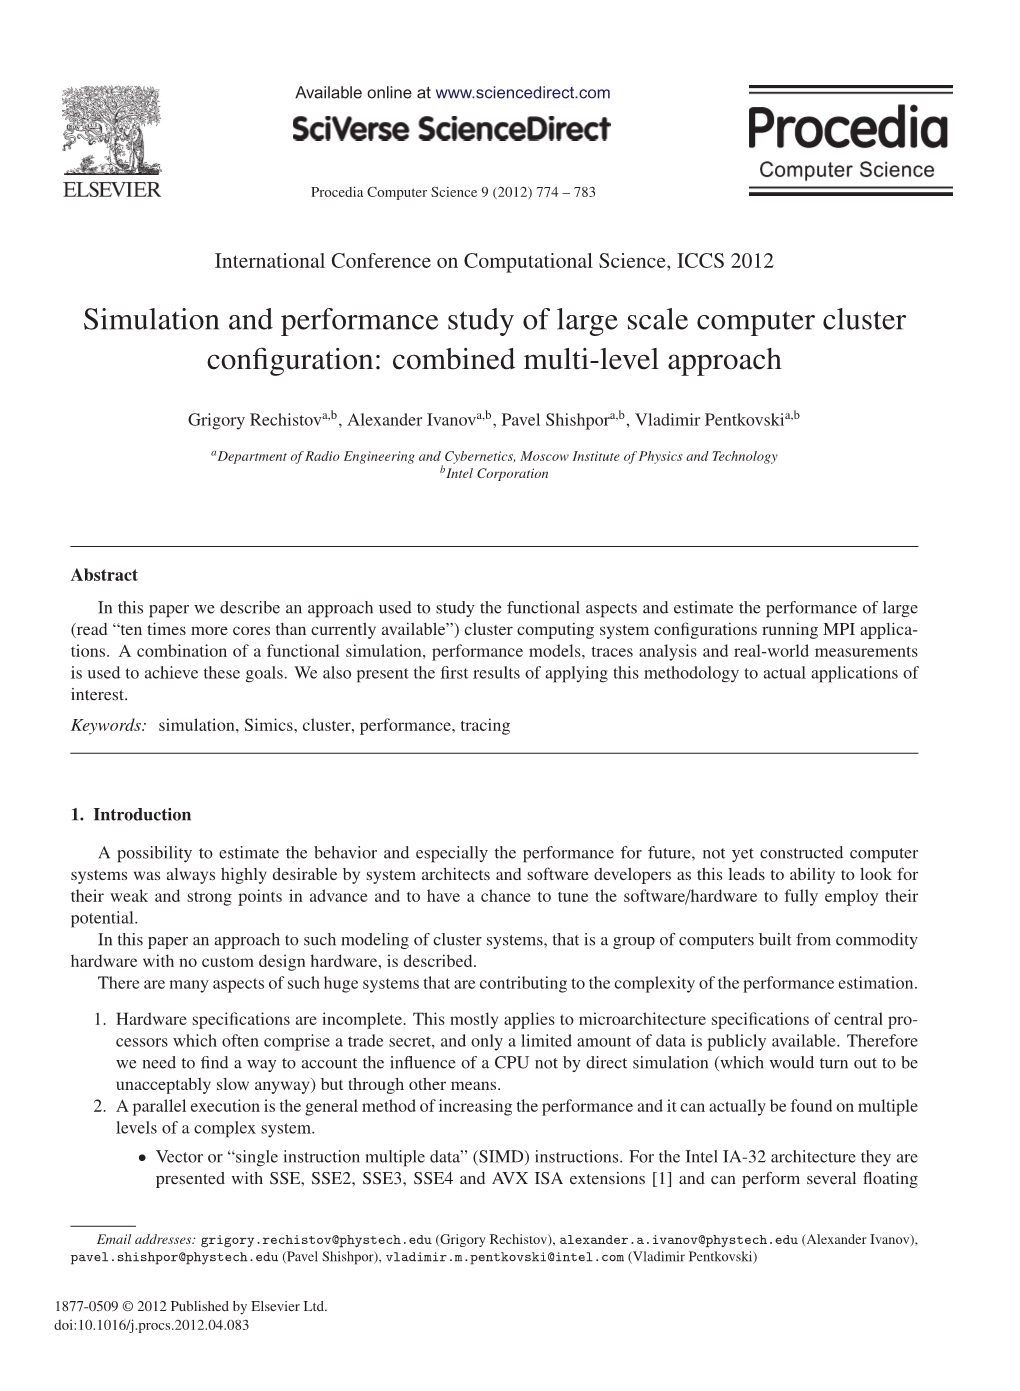 Simulation and Performance Study of Large Scale Computer Cluster Conﬁguration: Combined Multi-Level Approach